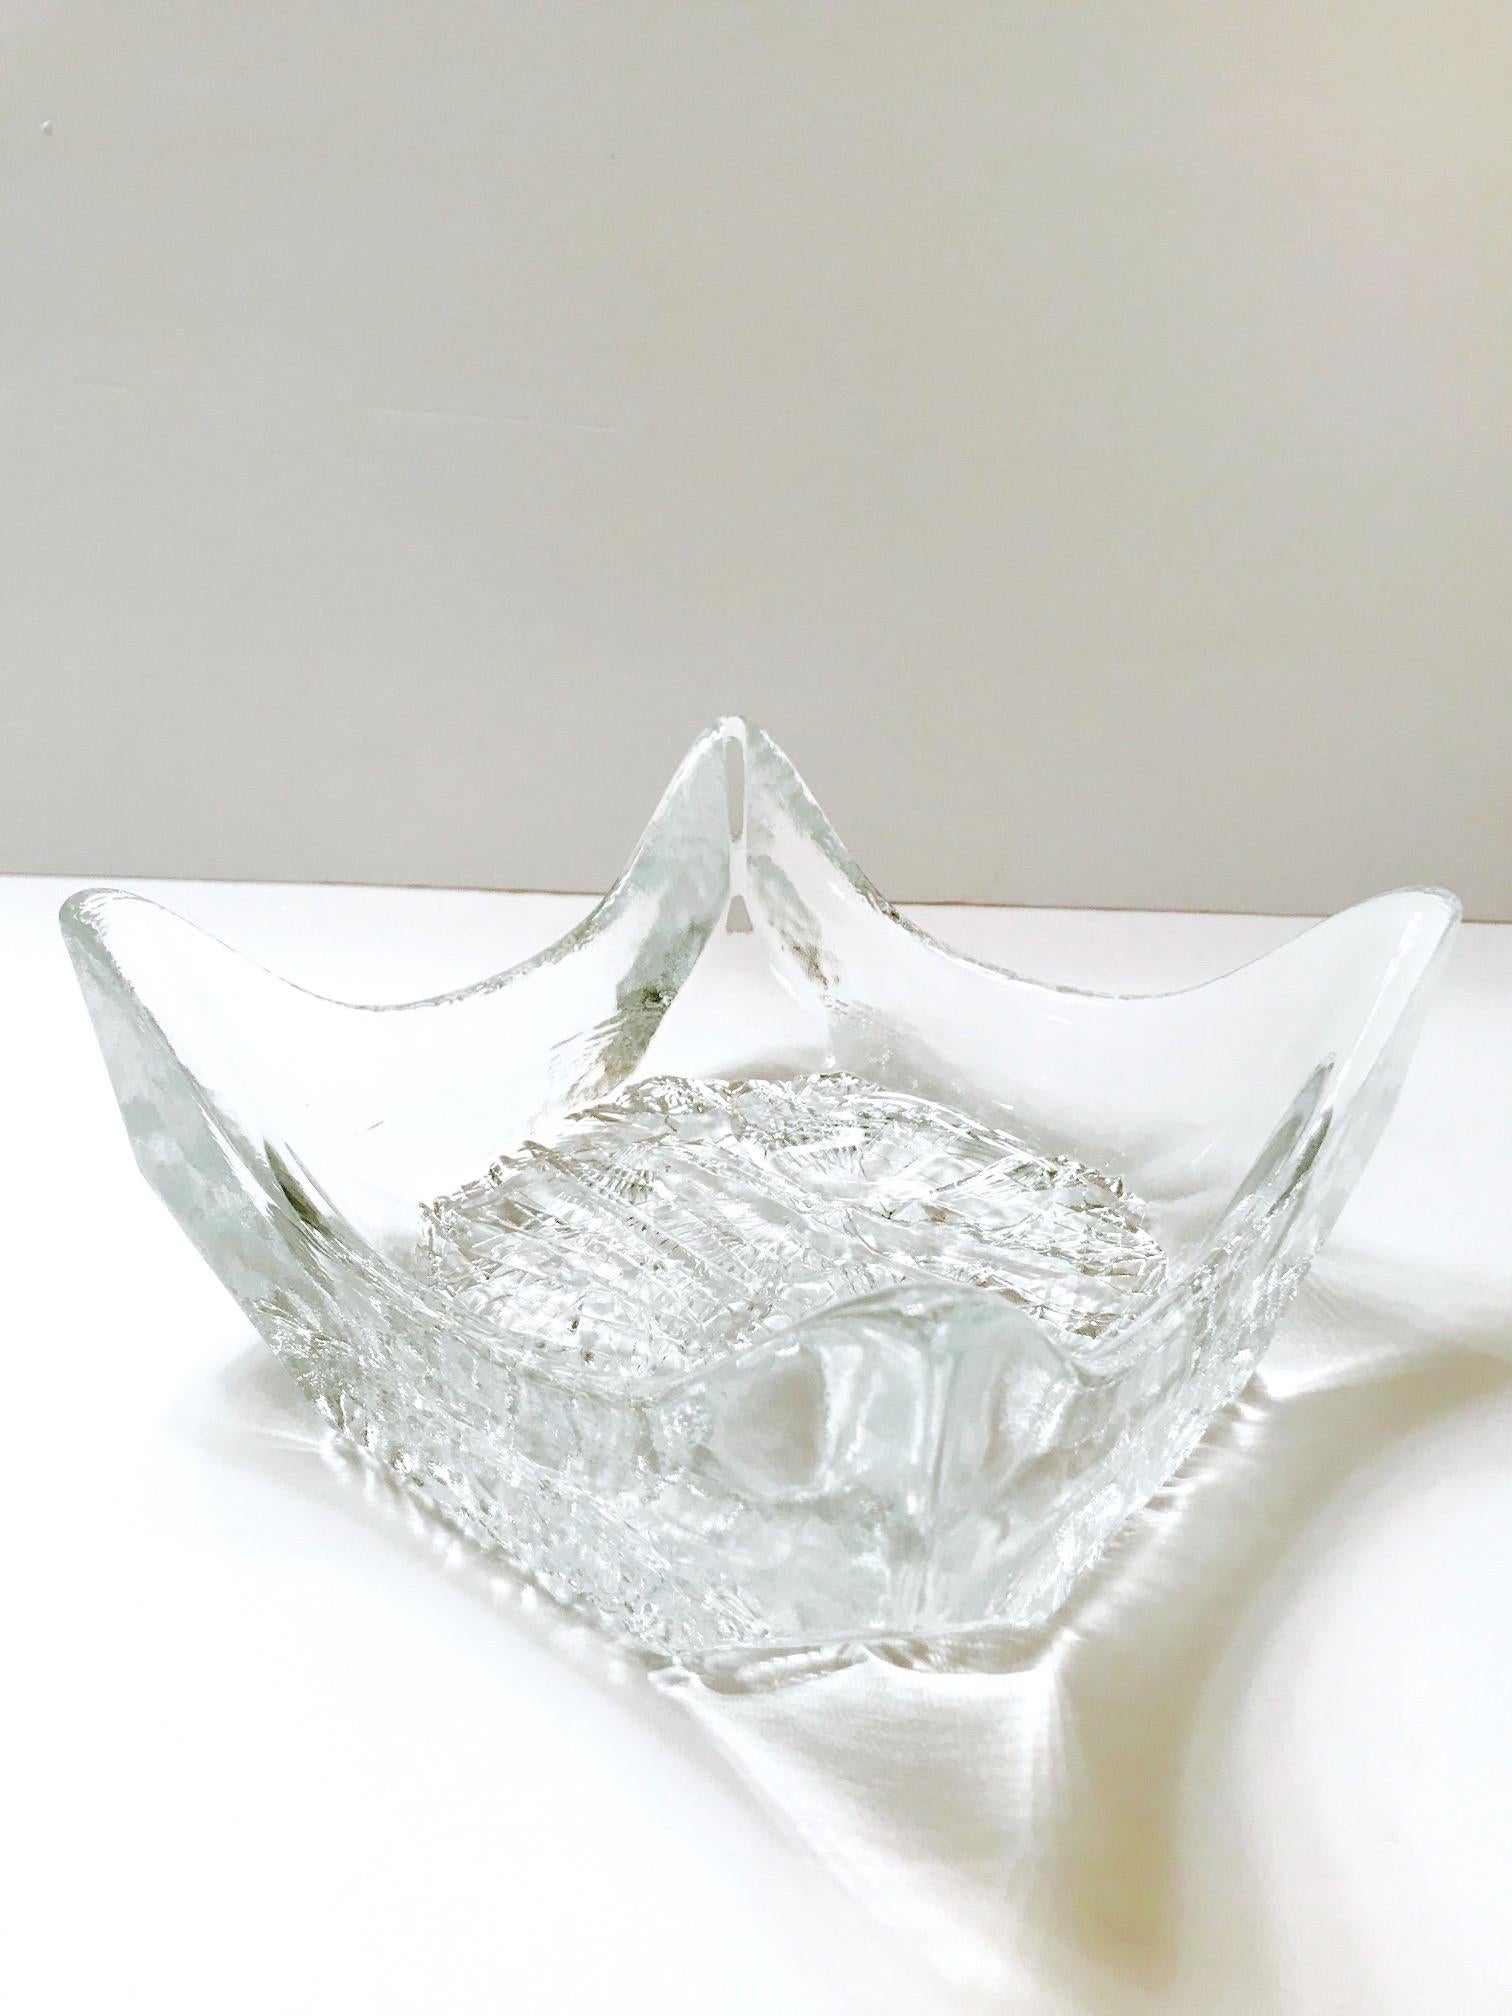 1970s Abstract Blown Glass Bowl with Icicle Design by Tapio Wirkkala, Finland 1